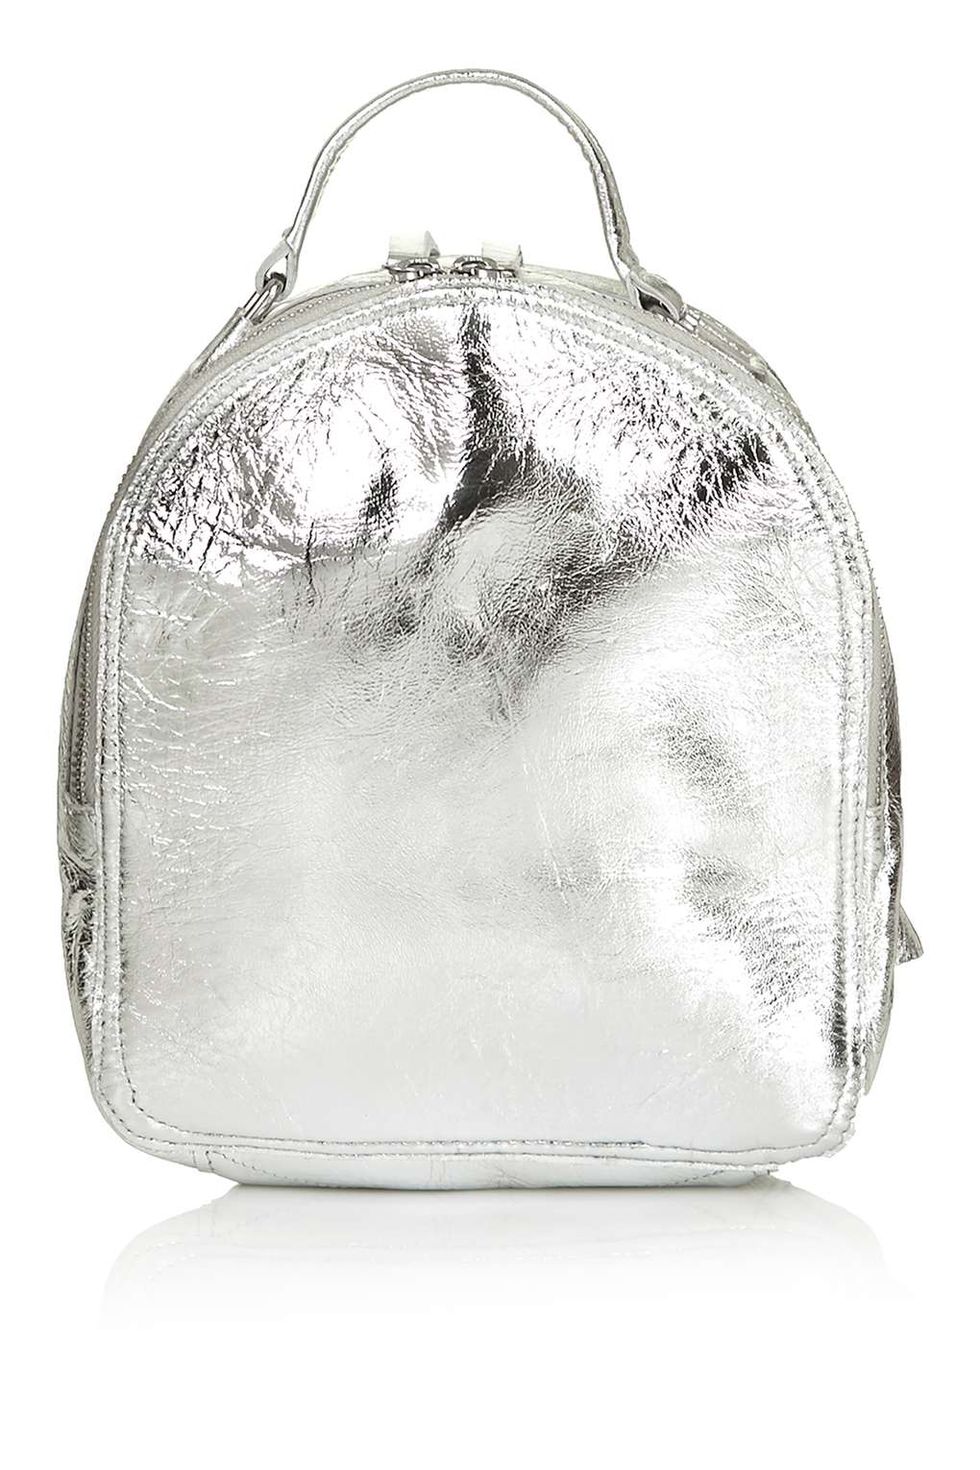 24 backpacks you could totally wear to work